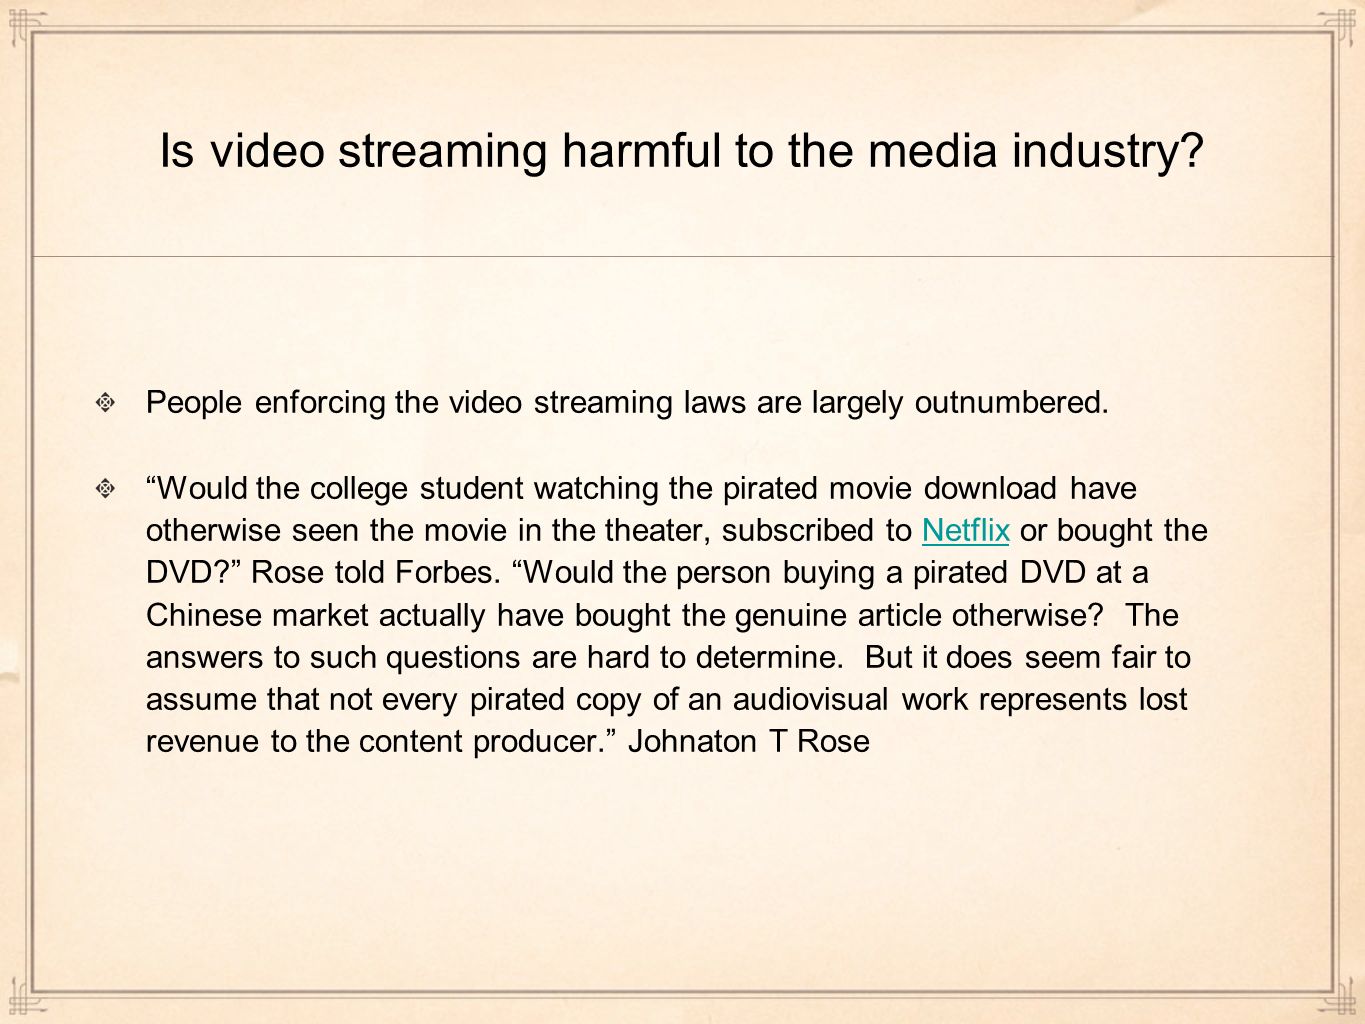 Is video streaming harmful to the media industry.